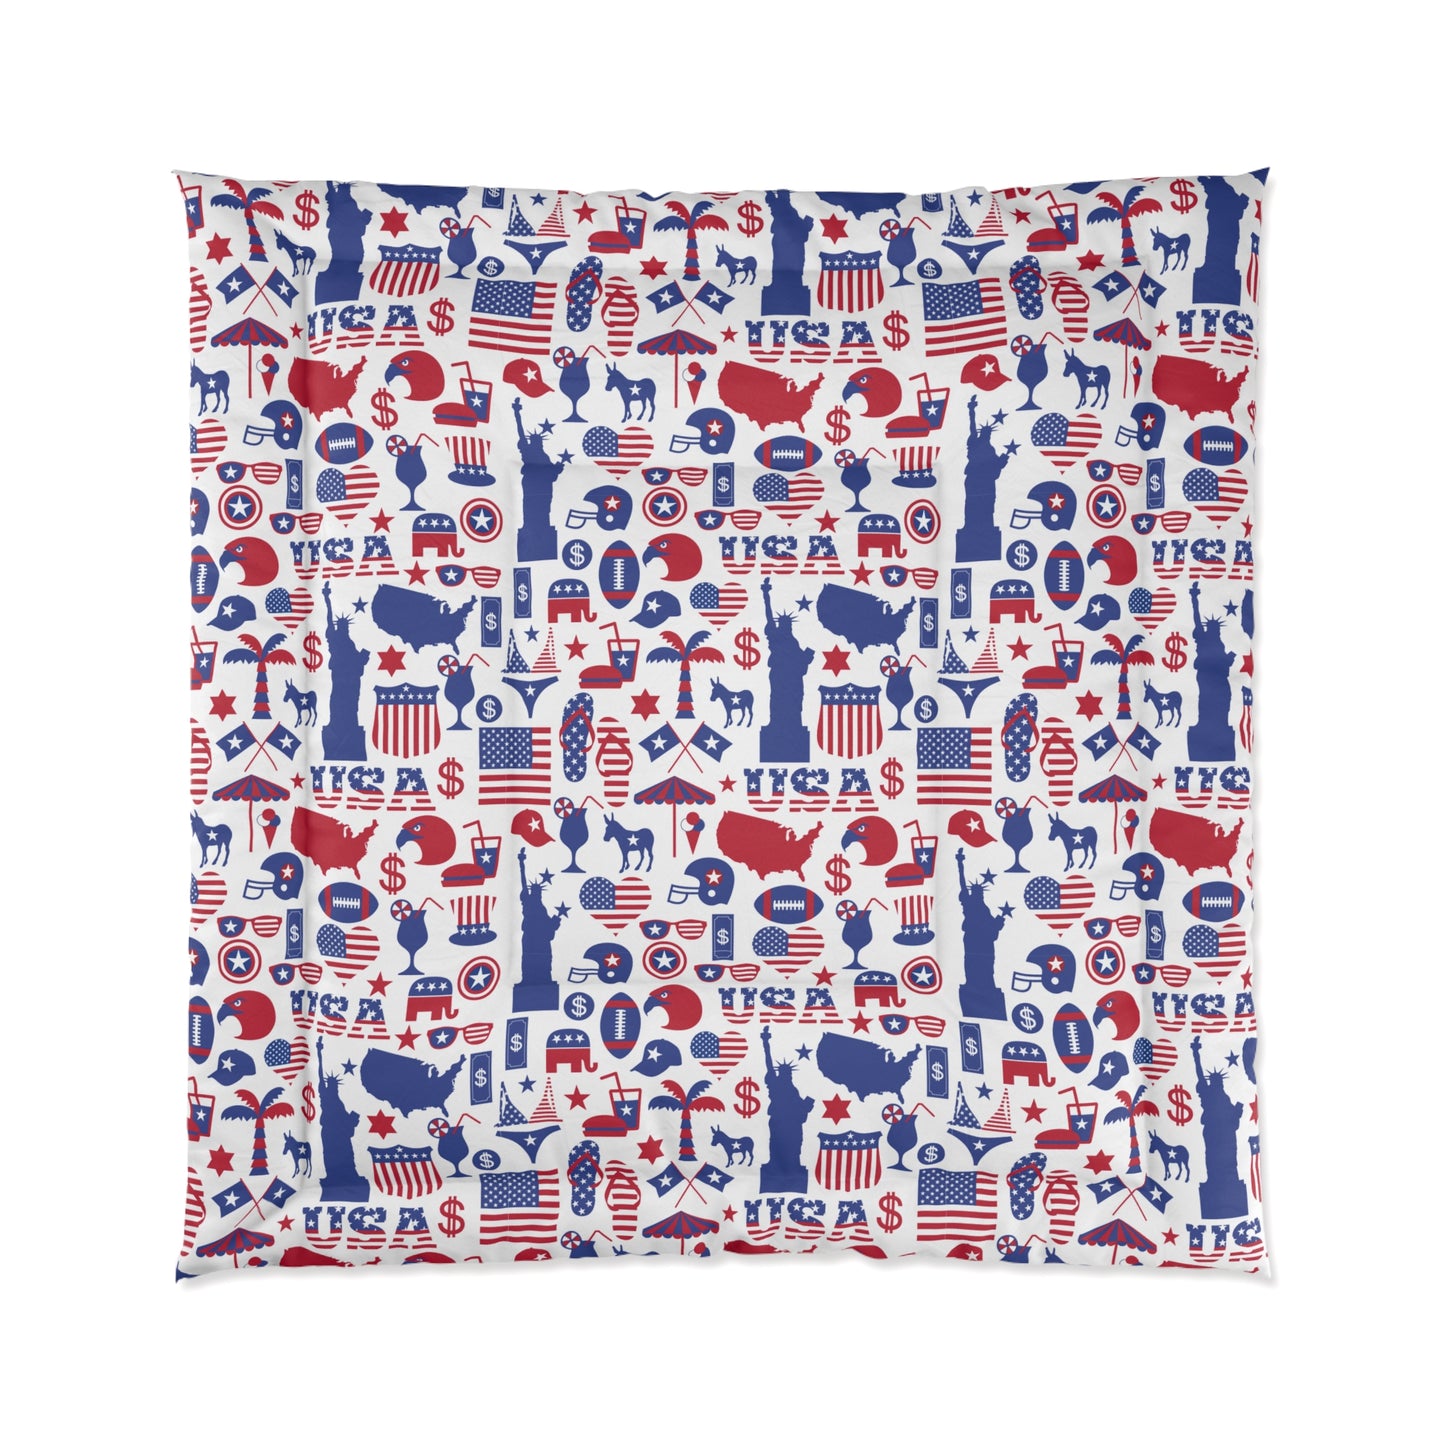 All American Red and Blue Comforter